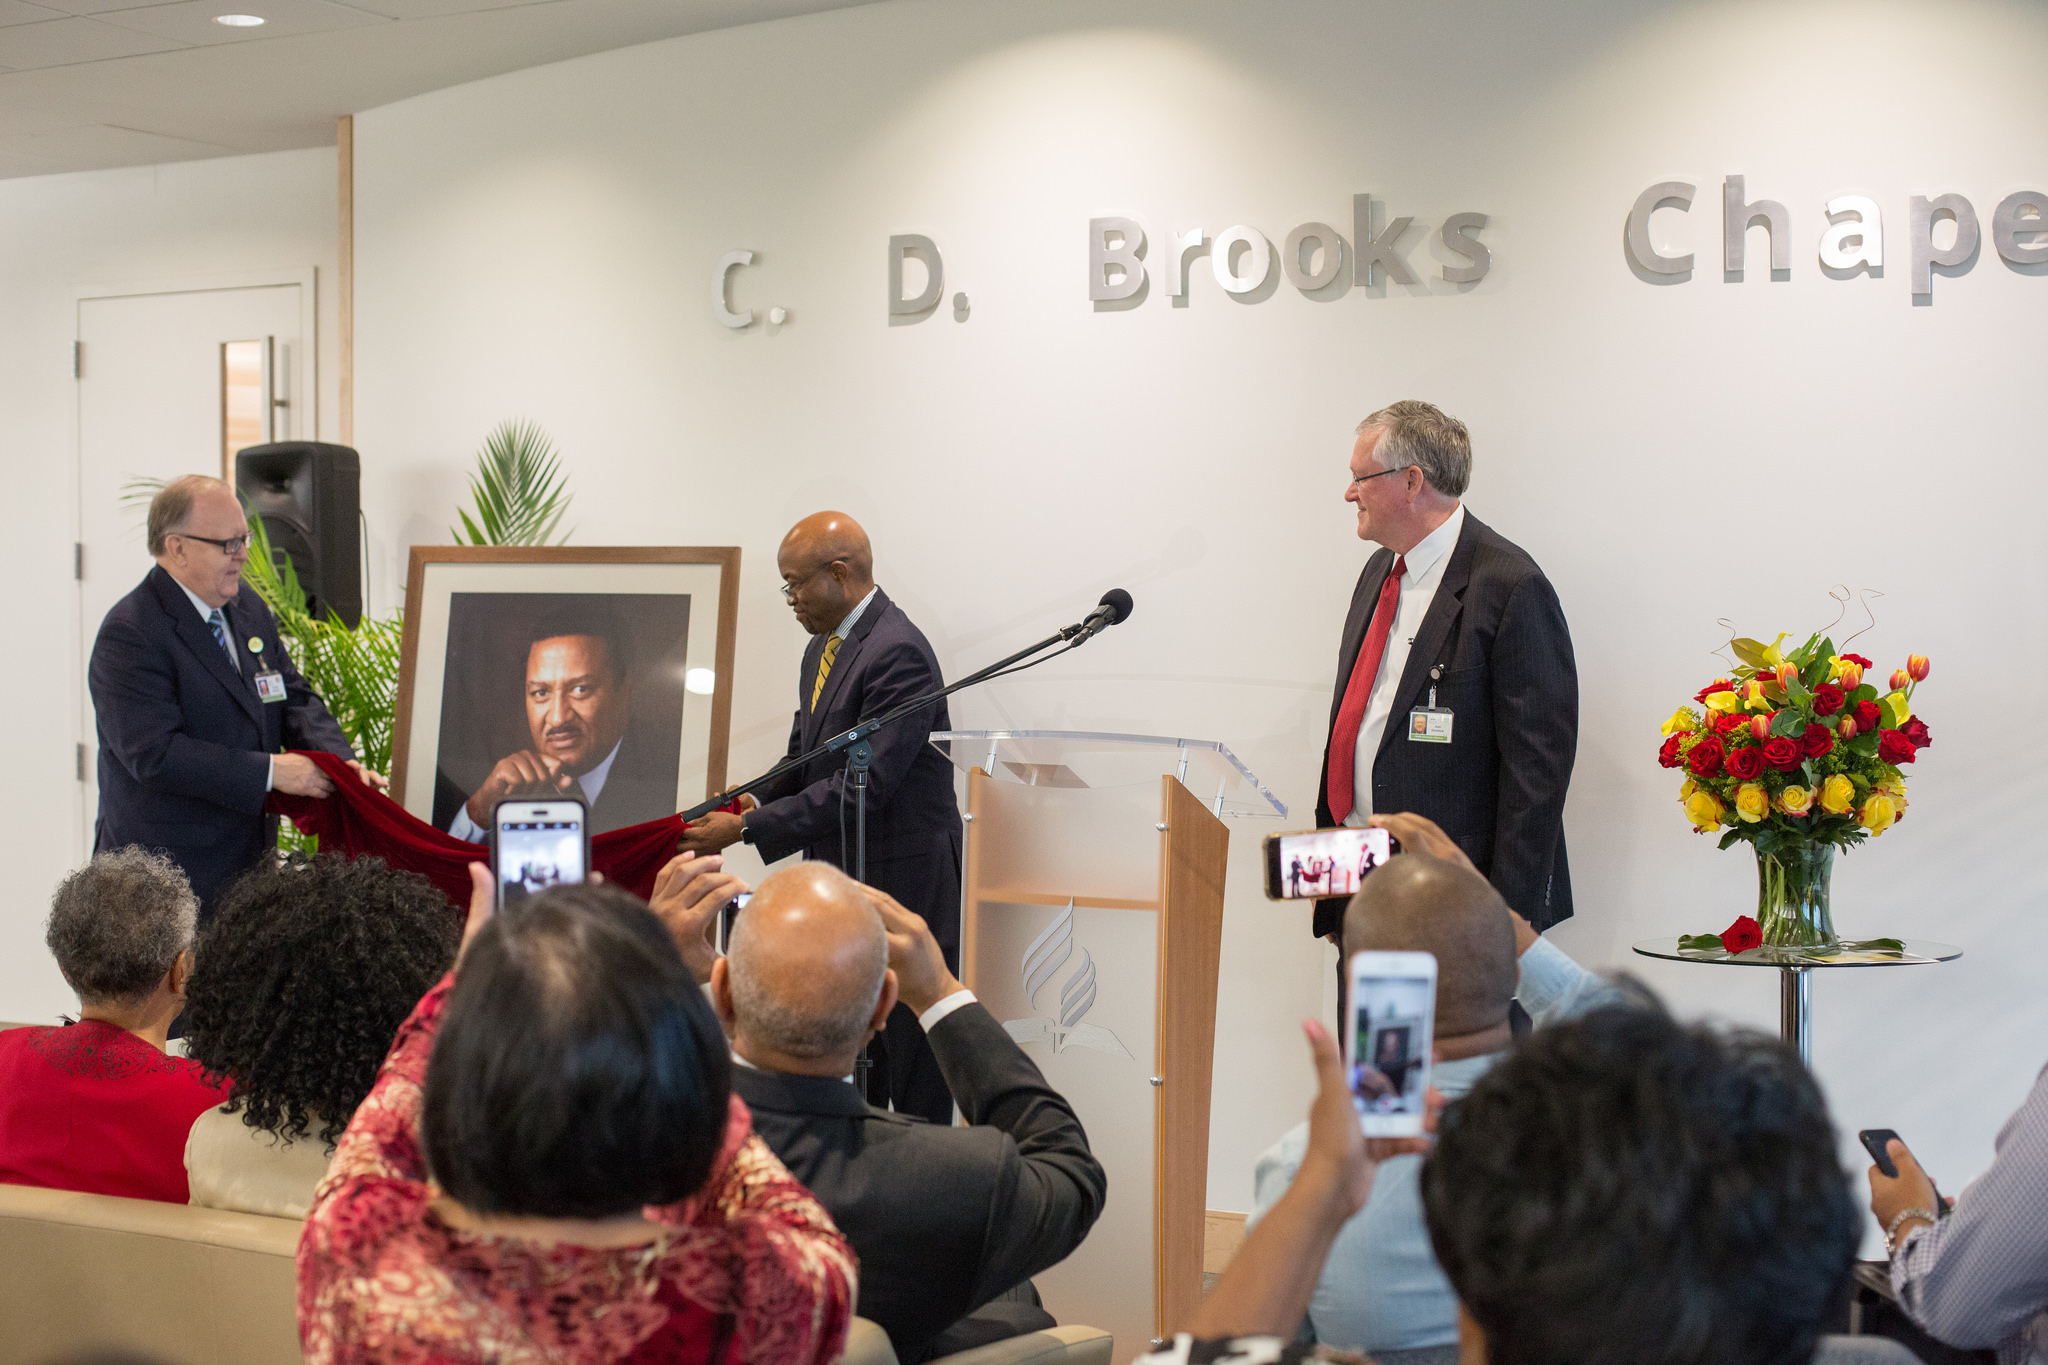 Dan Jackson, NAD president, Alex Bryant, NAD executive secretary, and Ken Denslow, executive assistant to the president of NAD, unveil a portrait during the C.D. Brooks Prayer Chapel Dedication Ceremony. 